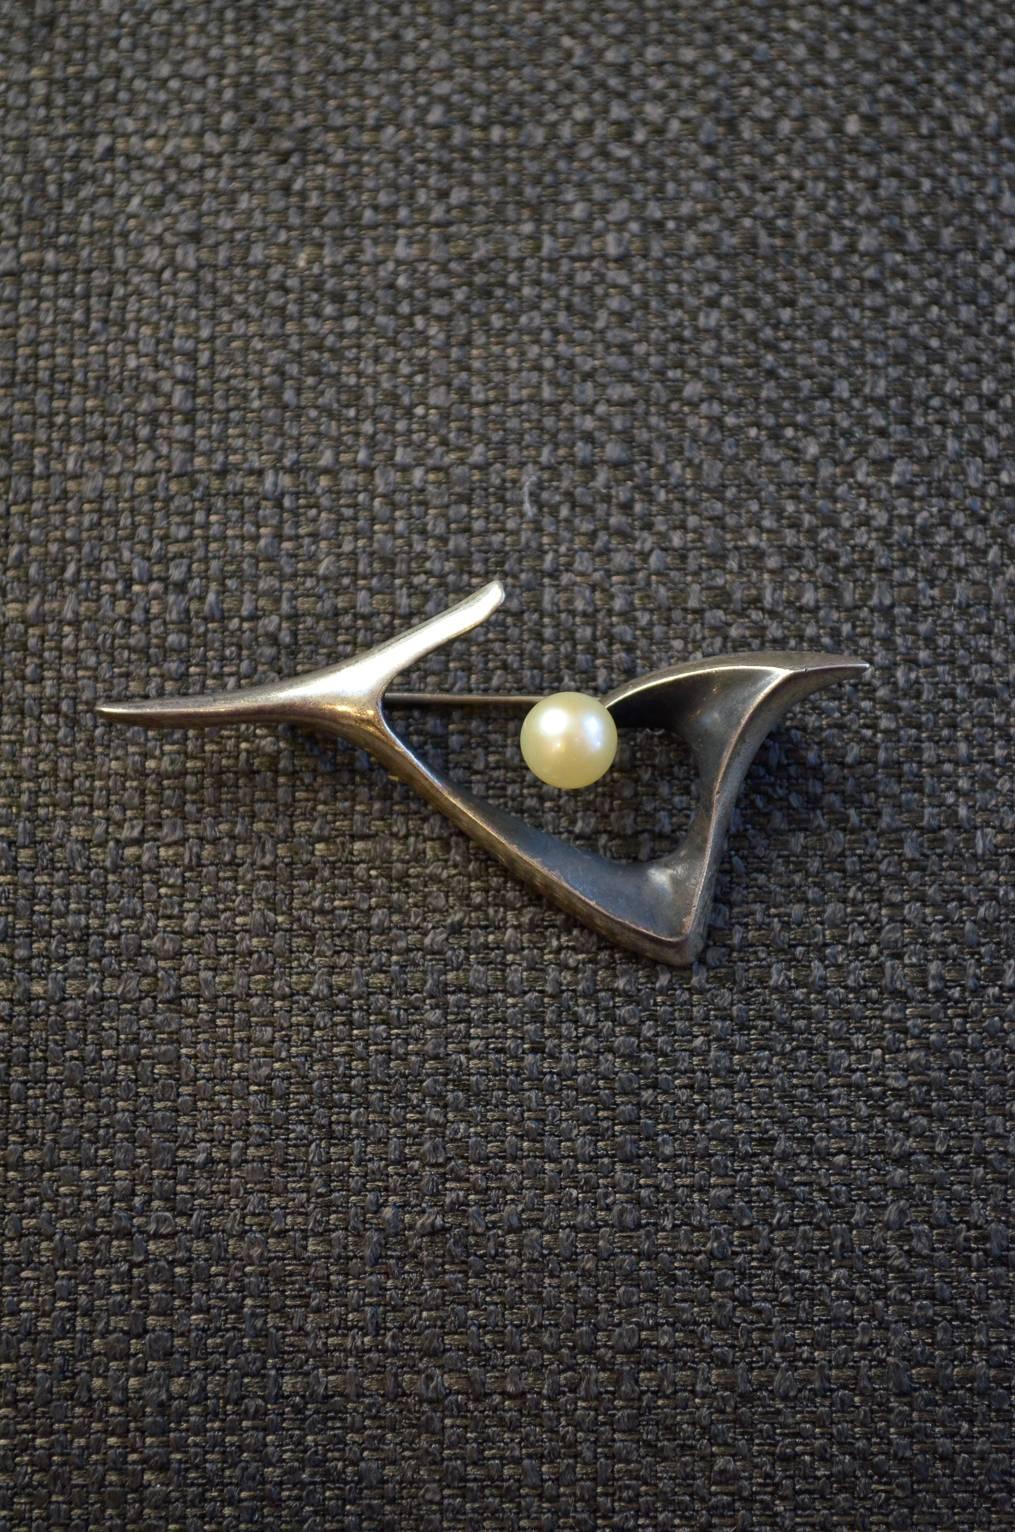 Circa 60's sterling silver and pear brooch or pin attributed to Ed Wiener.  Sterling stamp on reverse, very good condition, clasp is in working condition and holds tight.

Measures 2.25